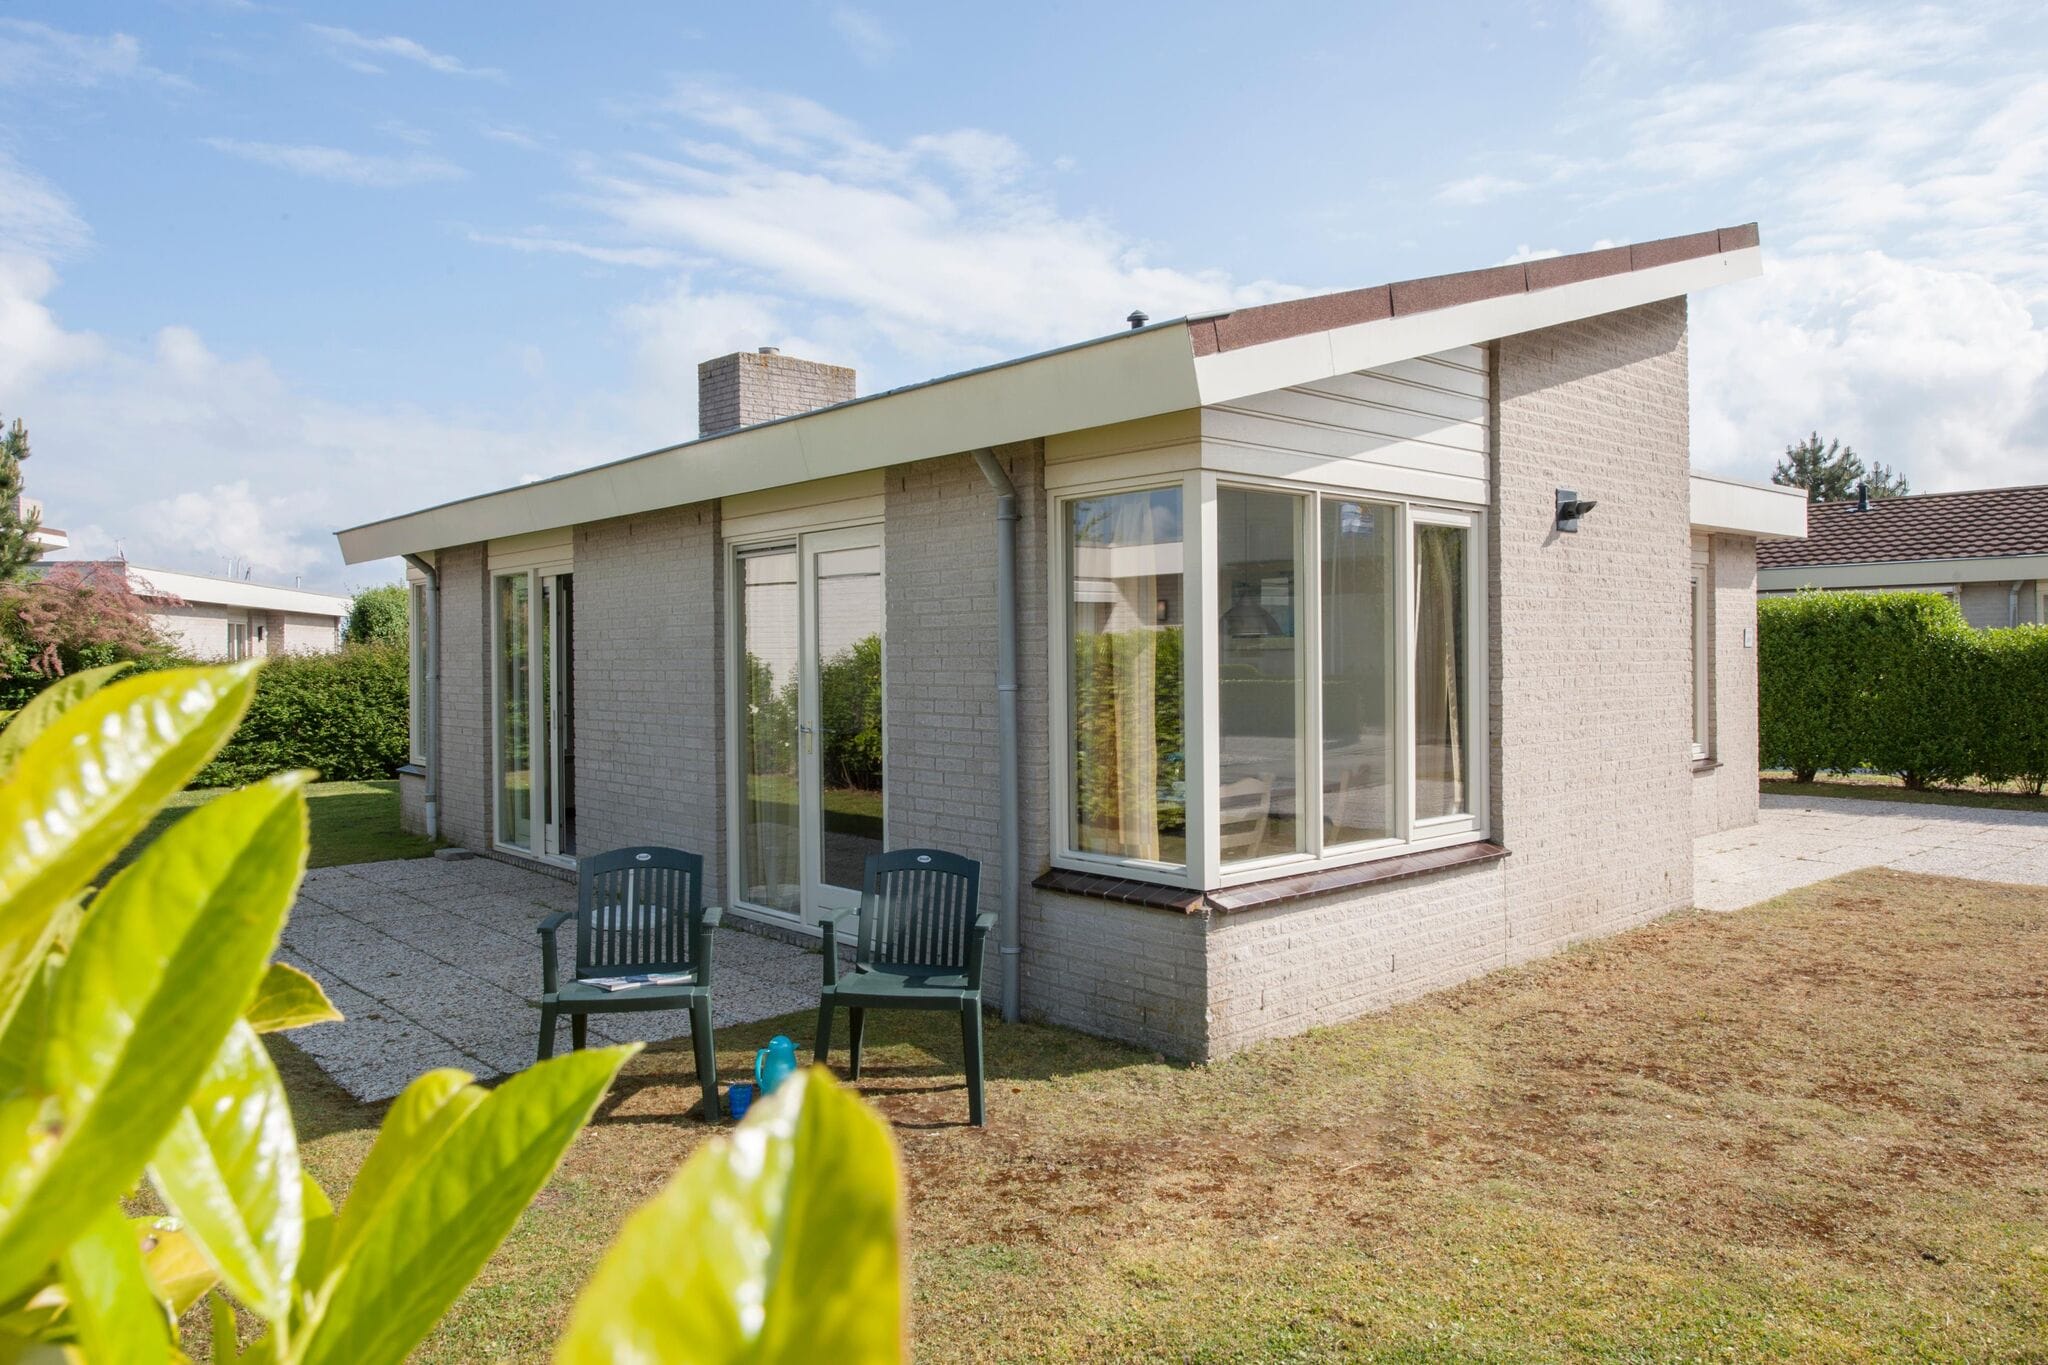 Detached bungalow, in a holiday park within walking distance of the beach